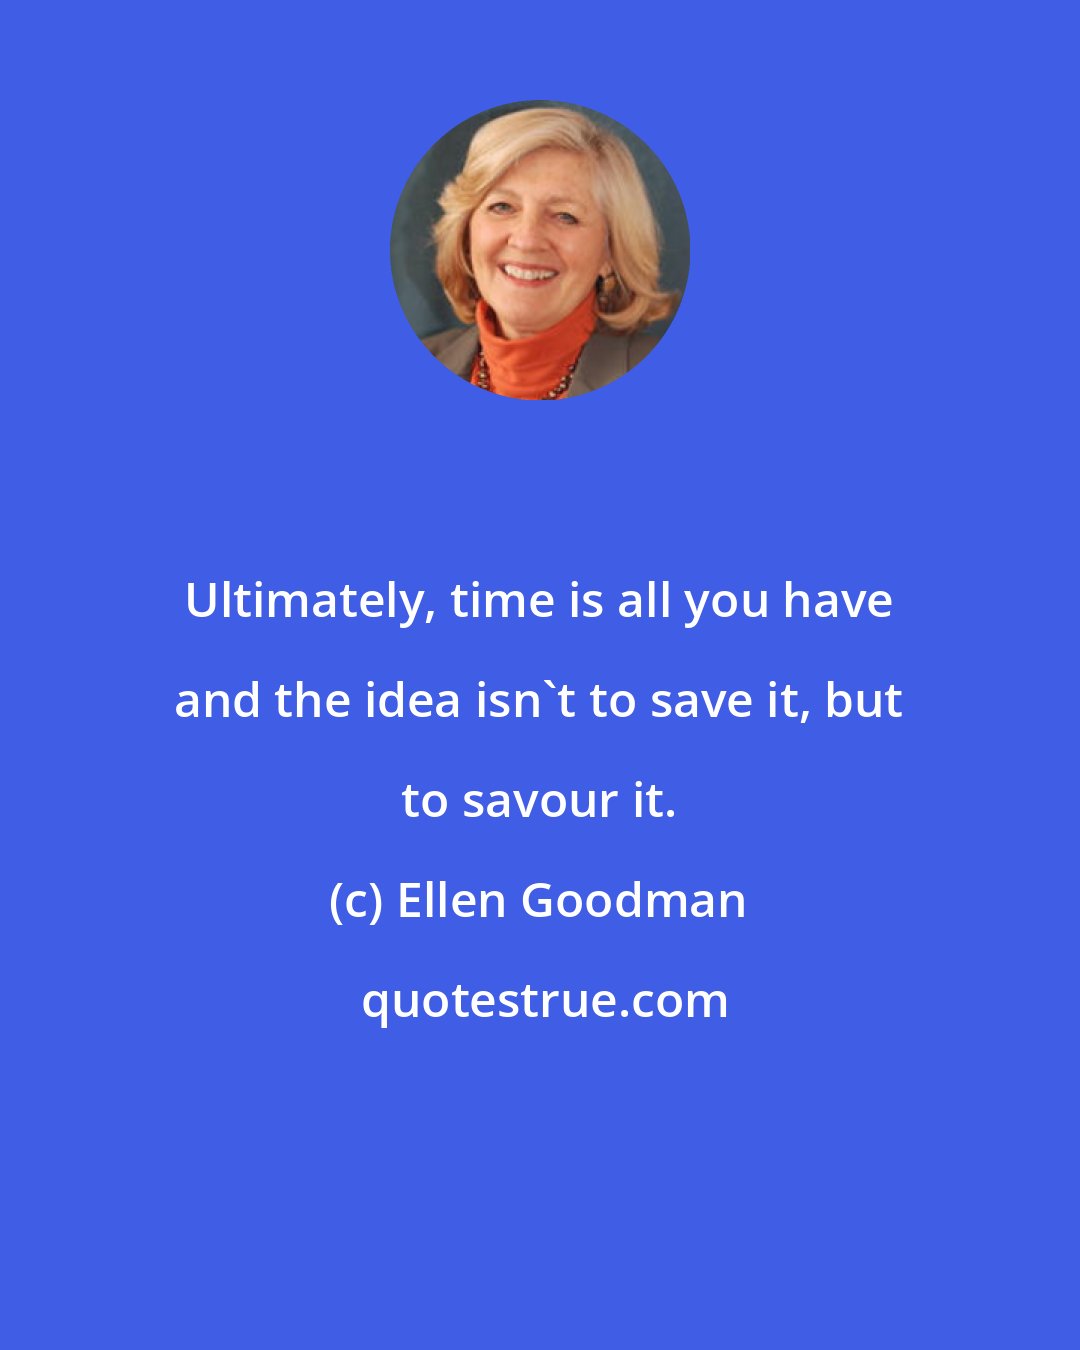 Ellen Goodman: Ultimately, time is all you have and the idea isn't to save it, but to savour it.